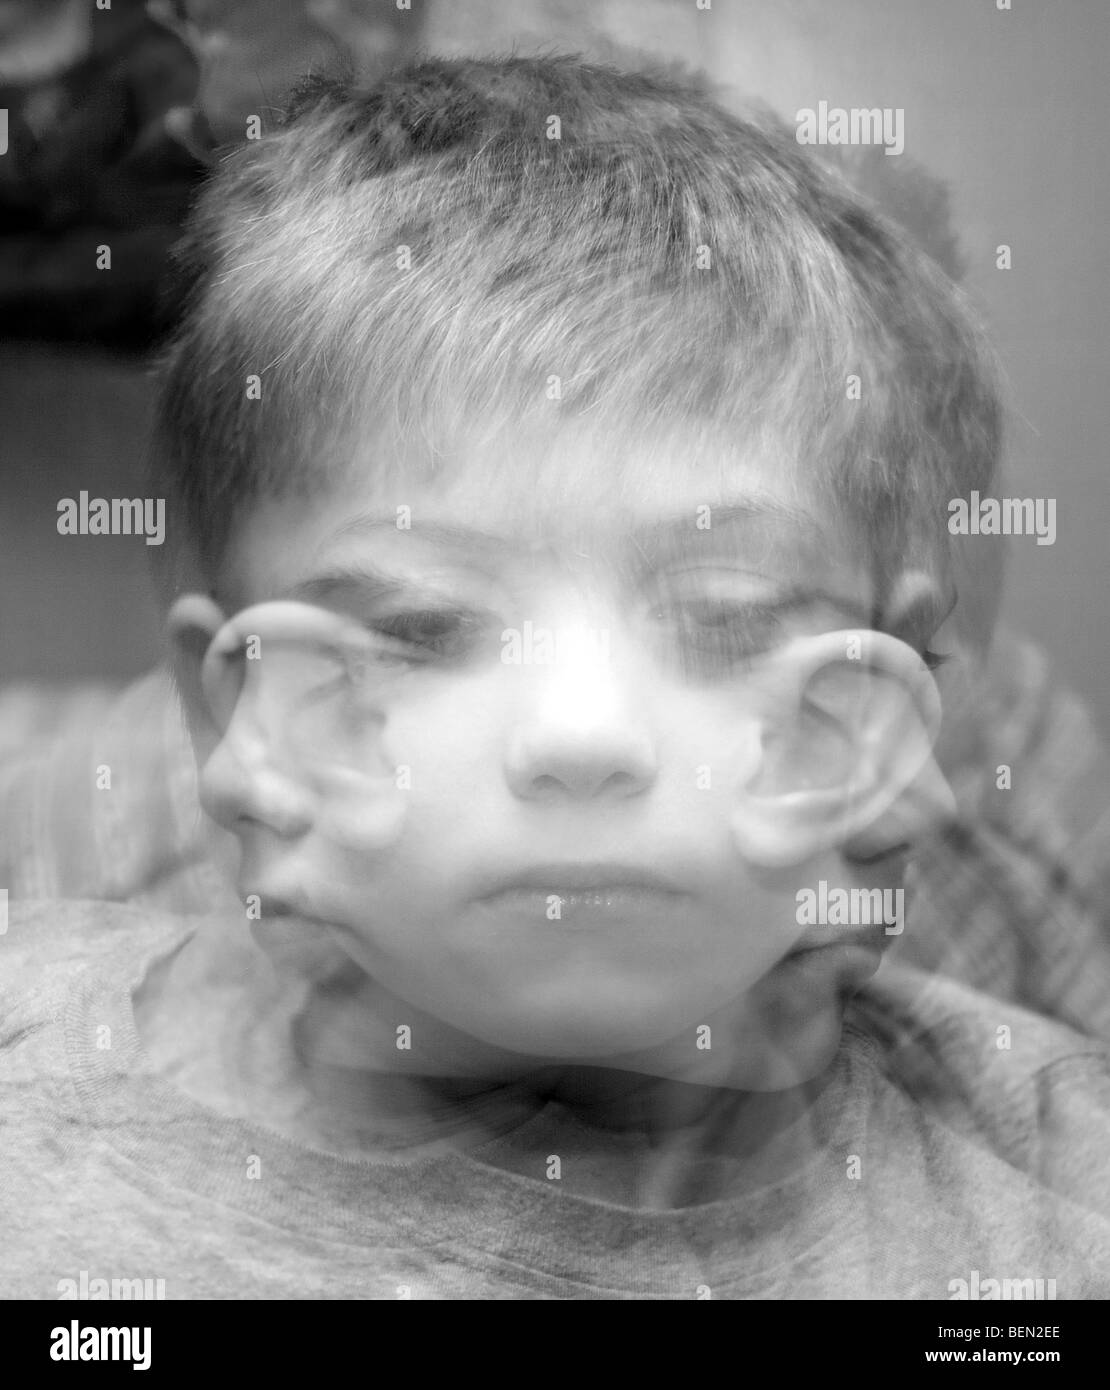 A Triple exposure depicting a small boy looking in three different directions Stock Photo